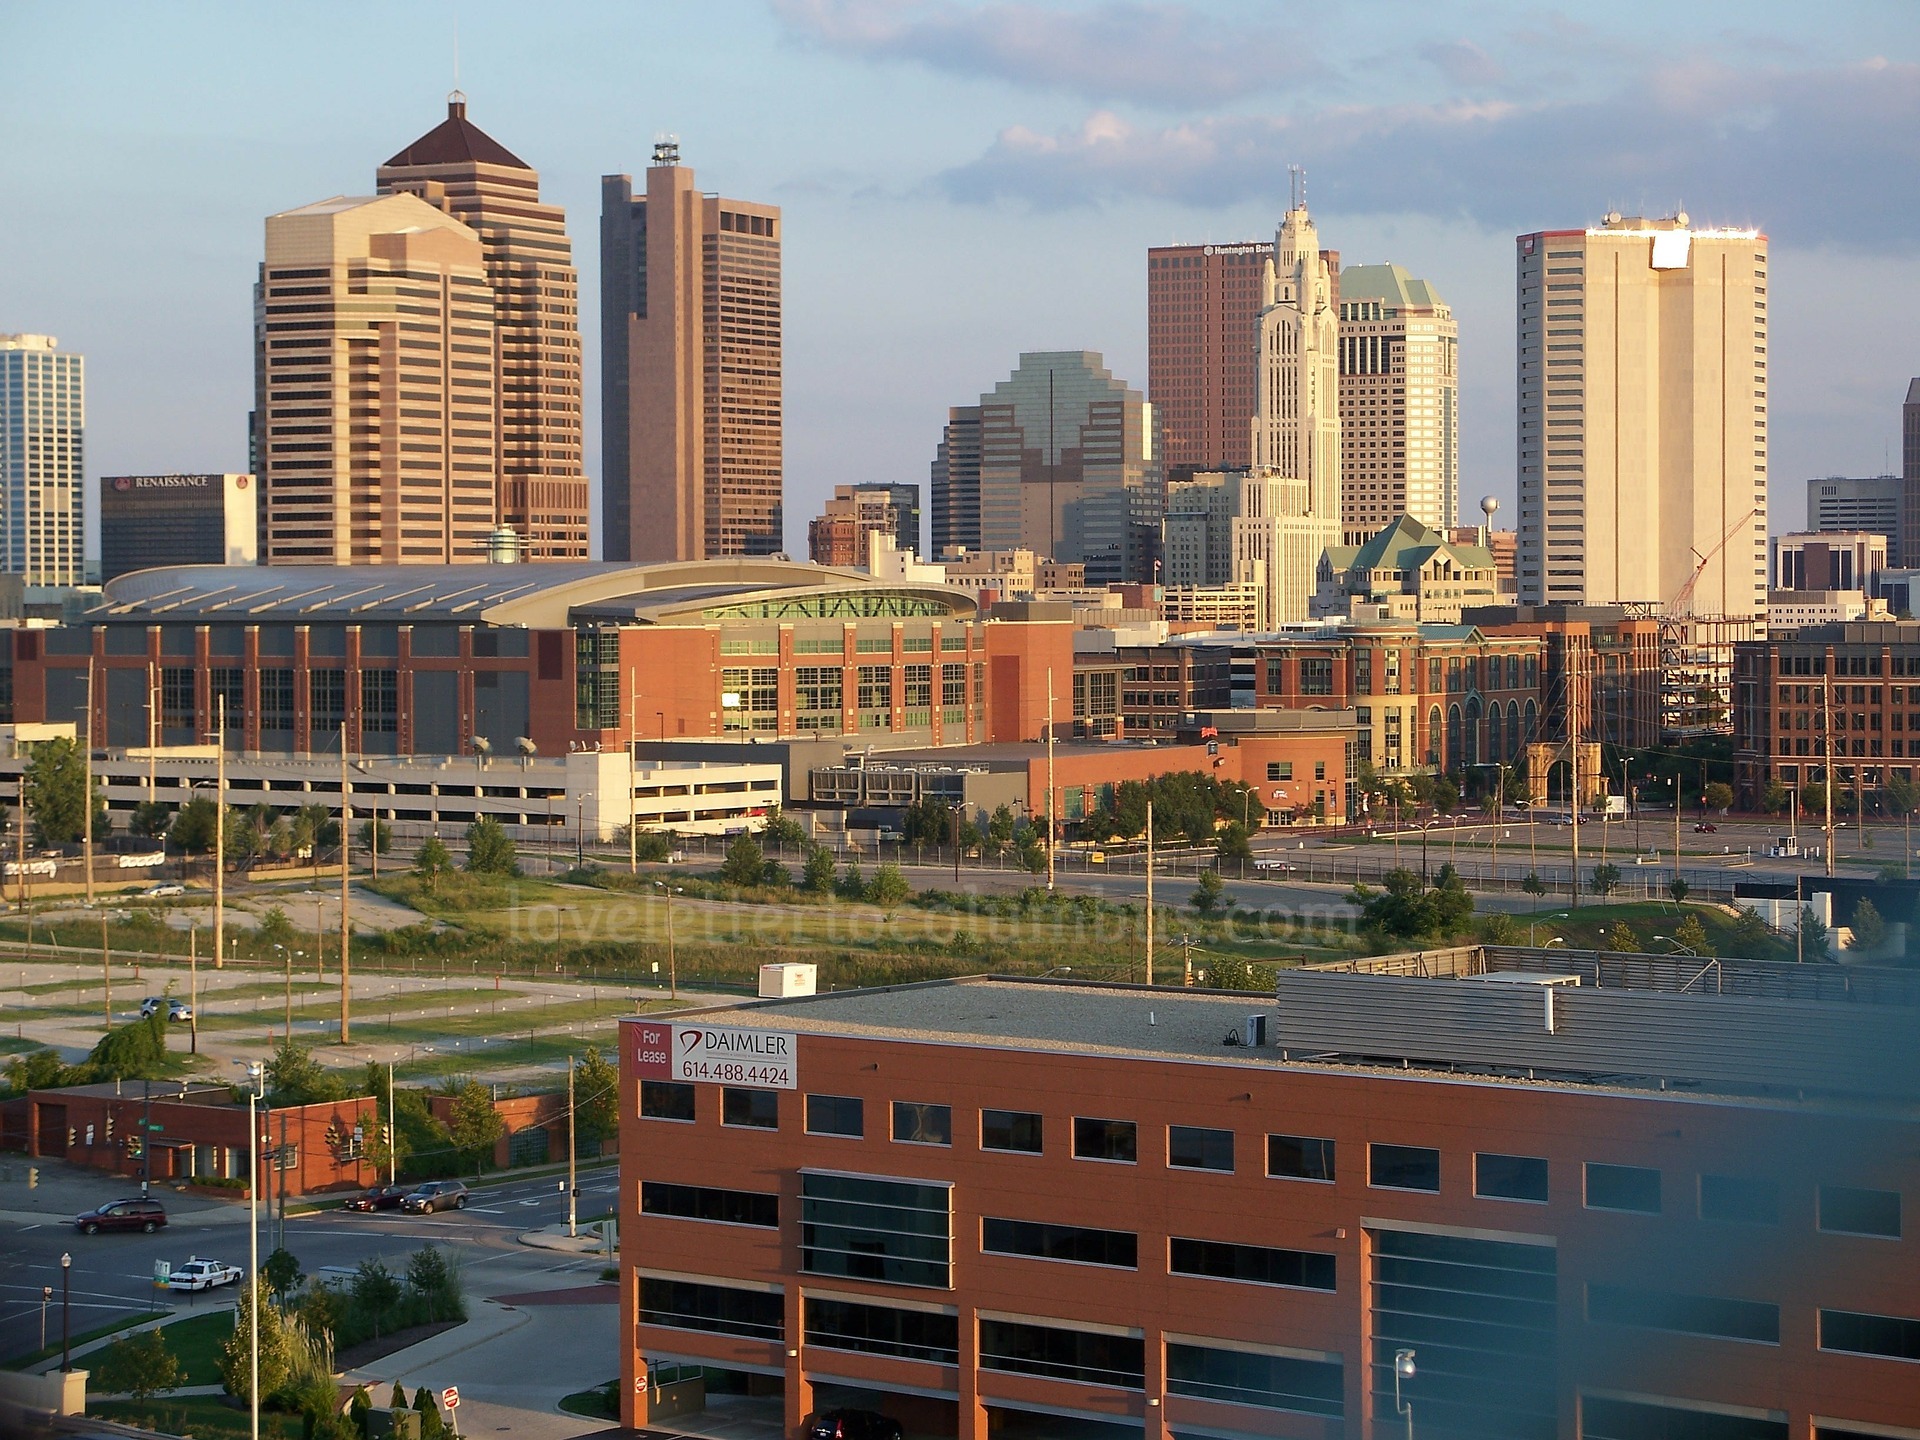 Nationwide Arena in downtown Columbus, Ohio